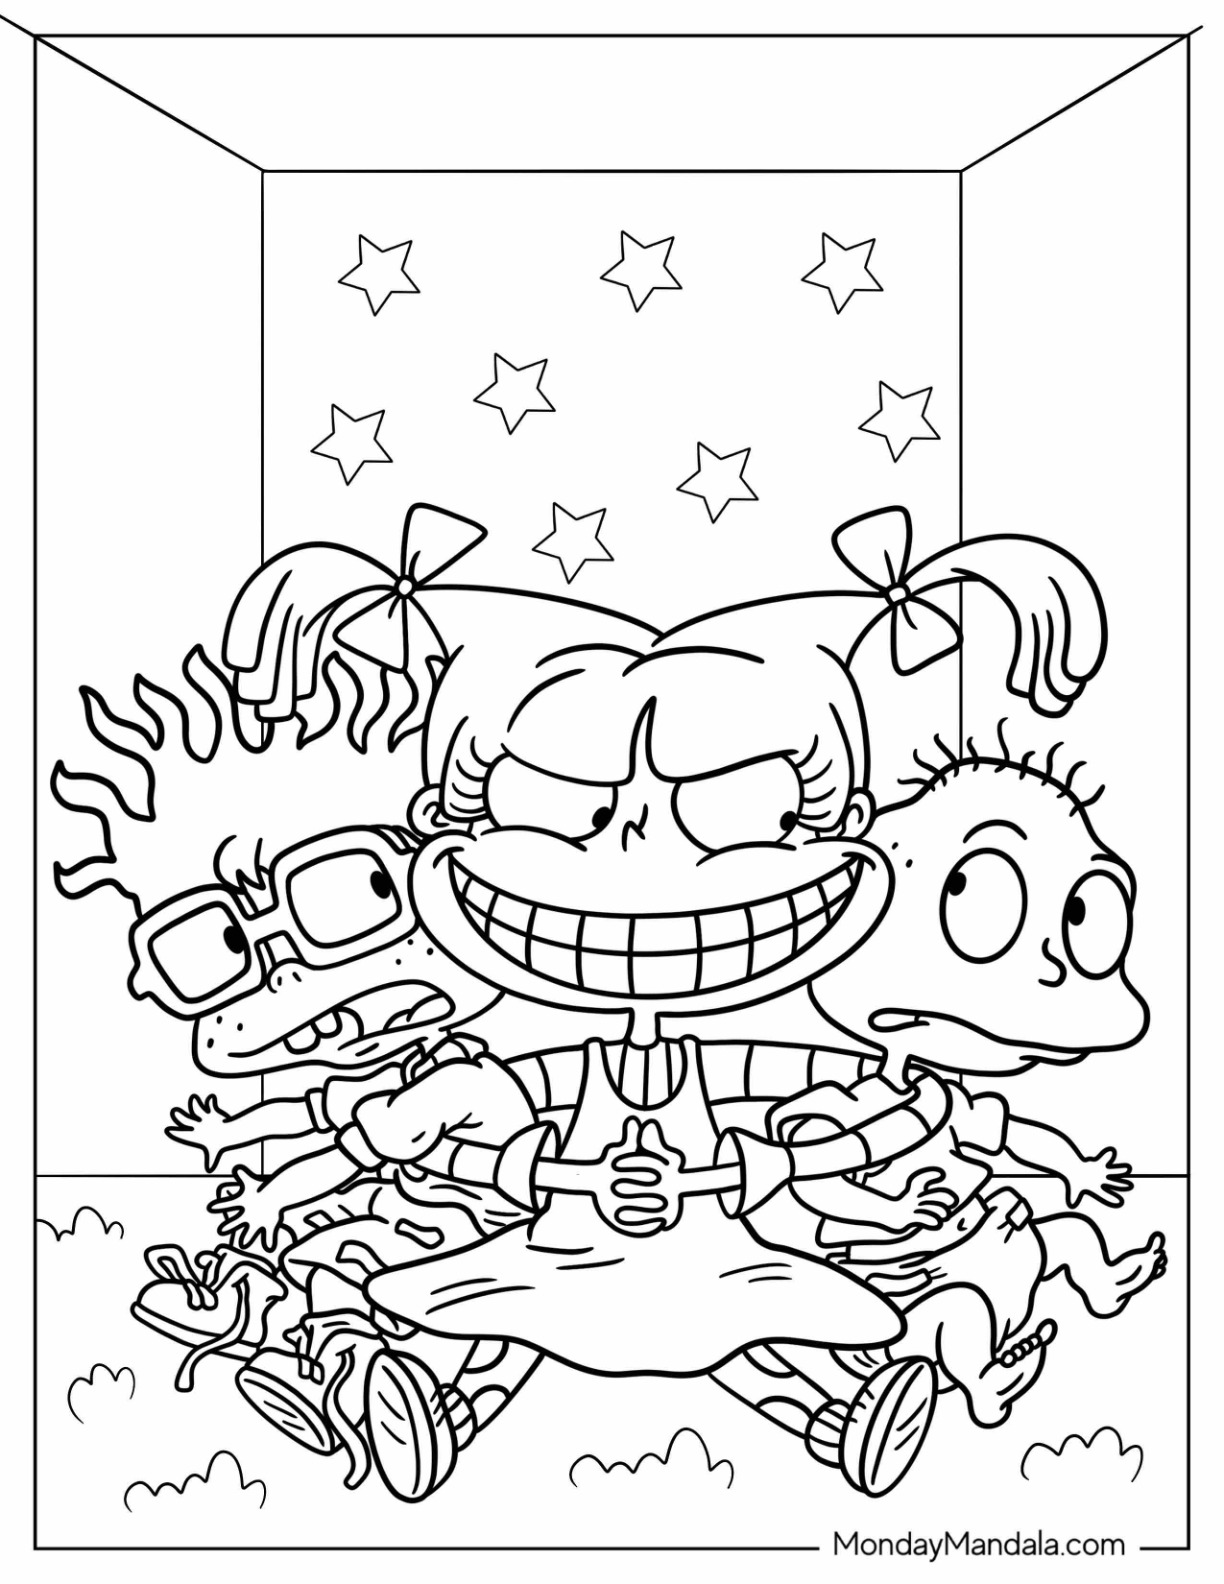 Rugrats coloring pages free pdf printables